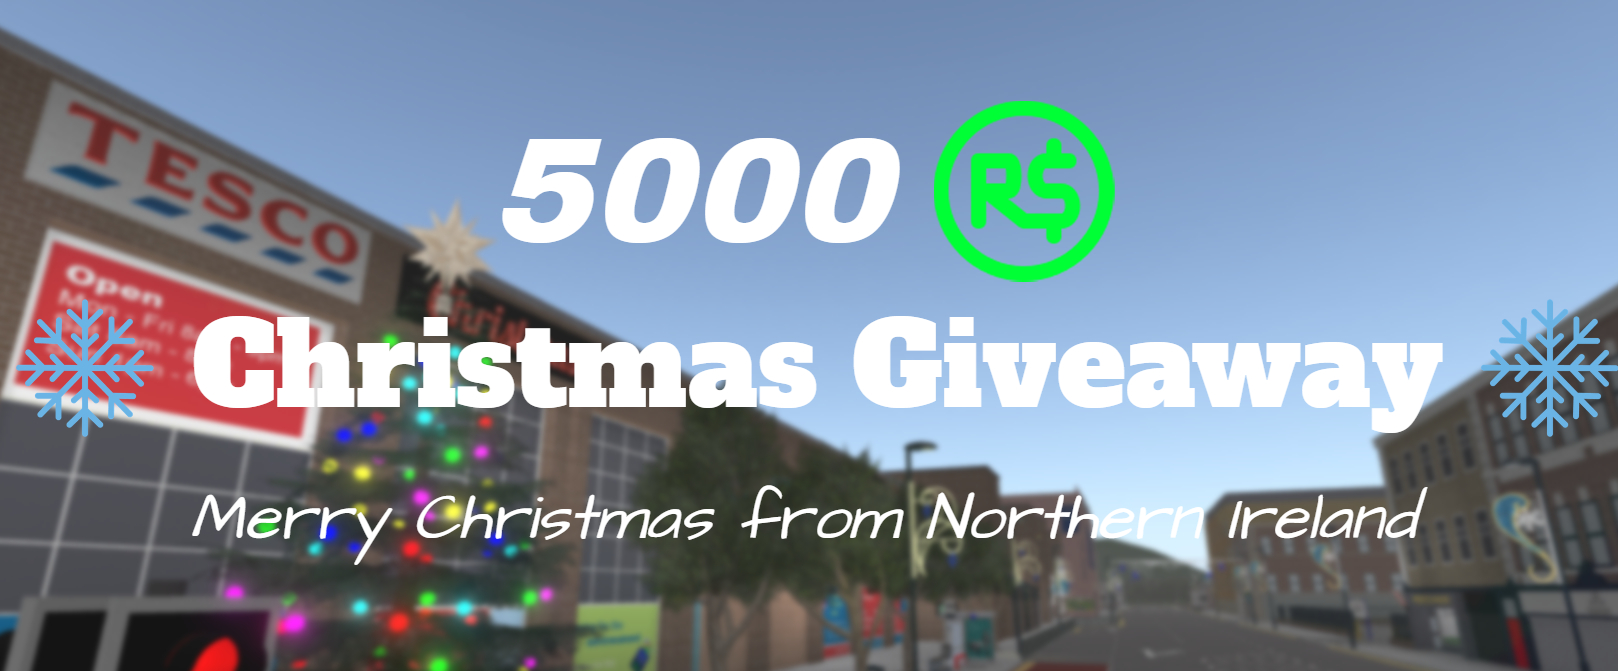 Northern Ireland On Twitter Christmas Giveaway 5000 Robux To Enter Our Christmas Giveaway Simple Send Us Your Best Photos On Londonderry Tagging Us Ni Rblx On Twitter 1st Place 5000r - tesco rp roblox